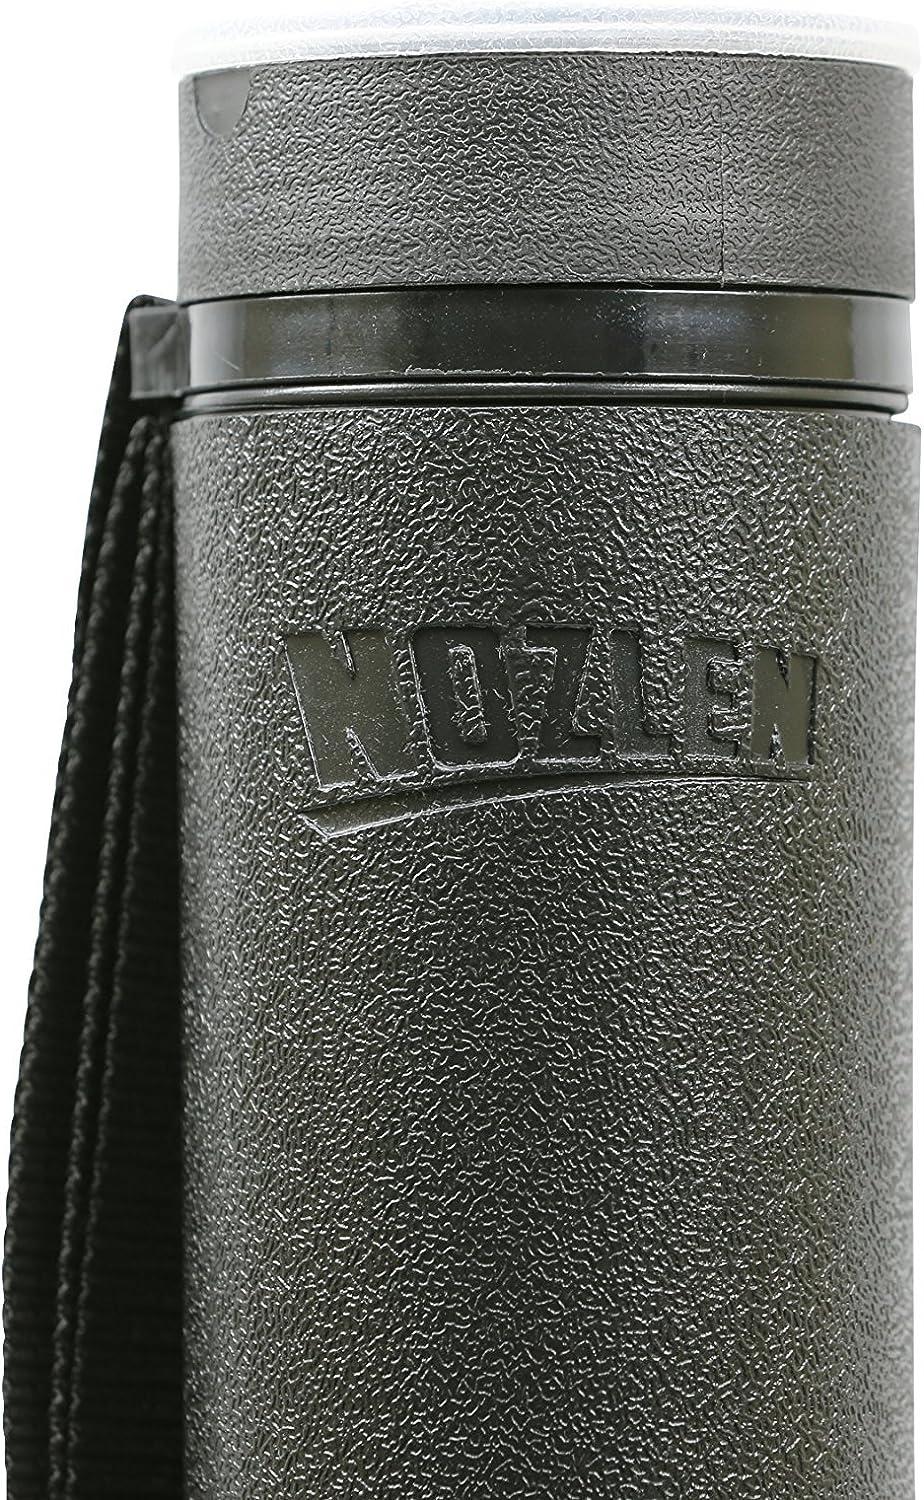 Nozlen Document Poster Tube - Black Plastic Storage Tube Expands from 24.5  up to 40 with Clear ID Card Cap - Water and Light Resistant - Telescoping  for Posters Artwork and Drawings Model DT3001